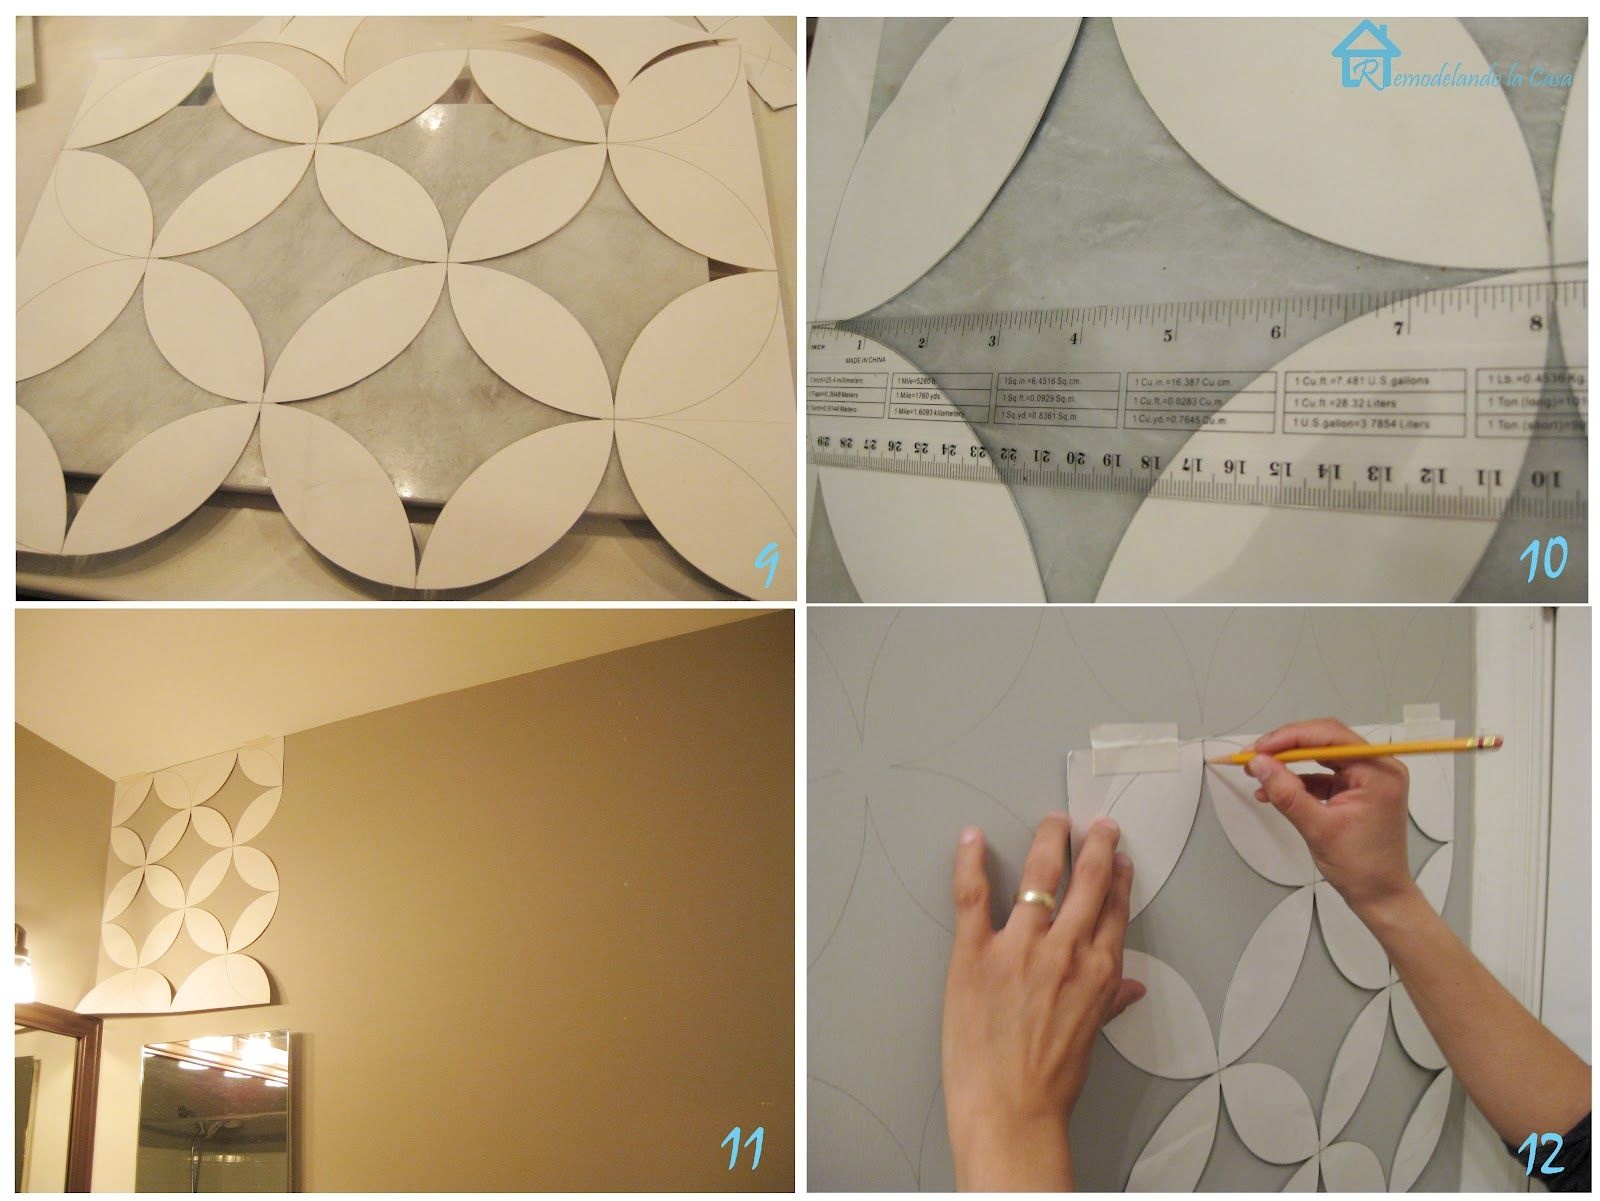 Free Printable Wall Stencils | With The Cut Out Pieces It Was Easier - Free Printable Wall Stencils For Painting